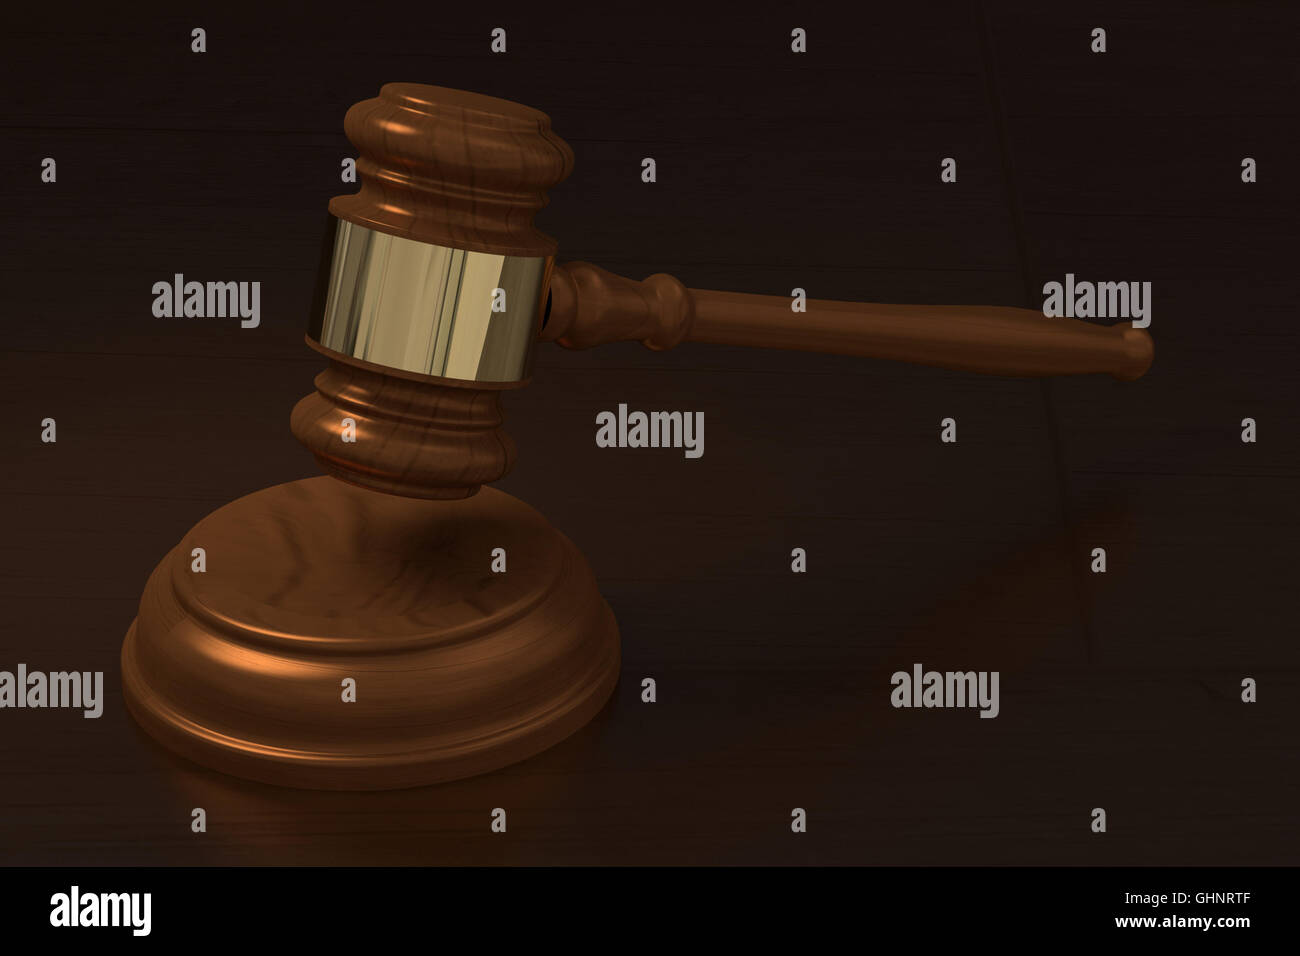 3D rendering of judge hammer on a wooden table Stock Photo